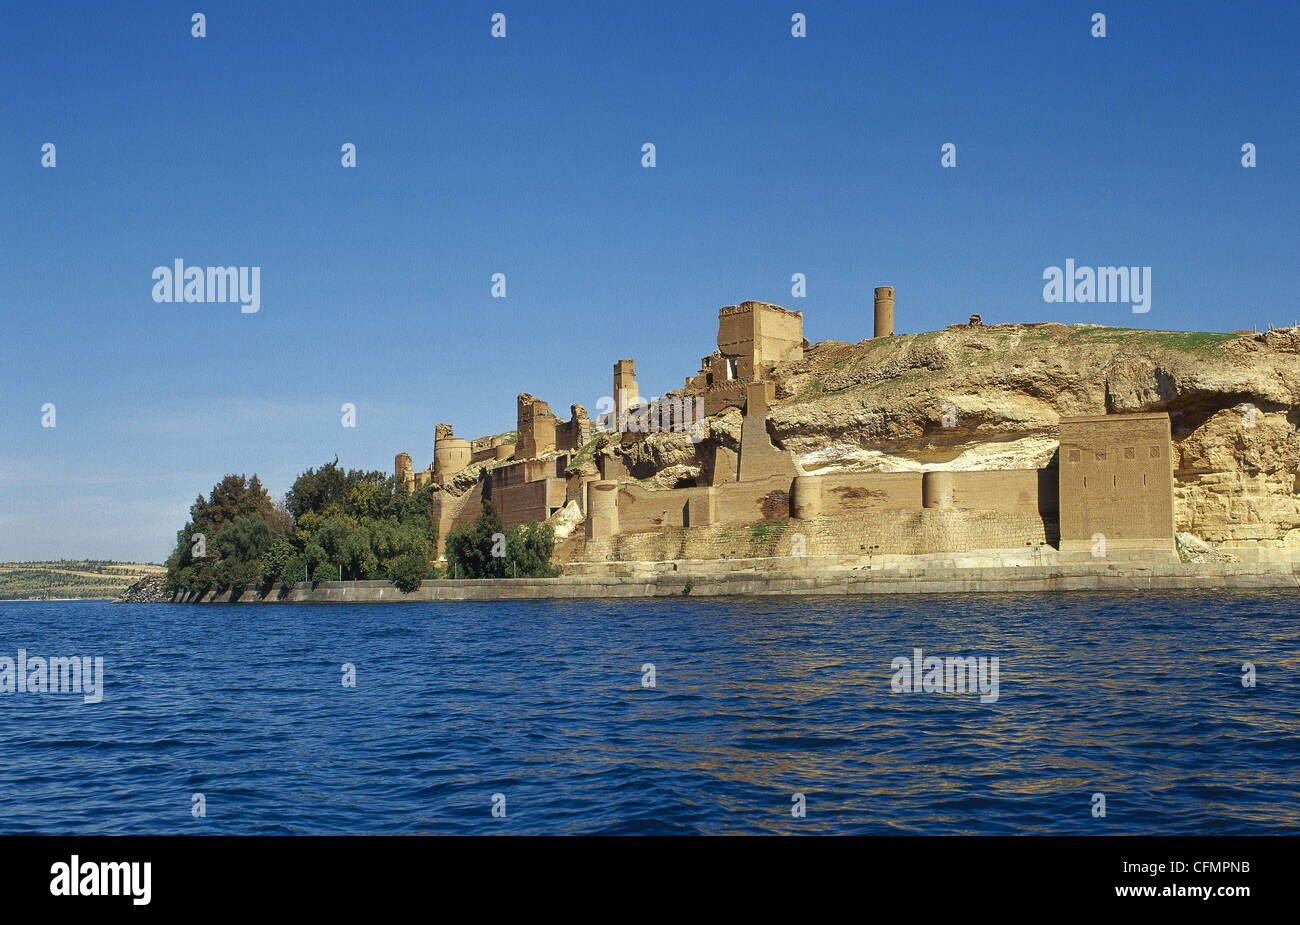 Syria. Qal'at Ja'bar. Castle on the left bank of Lake Assad. Nur ad-Din Zangi rebuilt the castle from 1168 onwards. Stock Photo